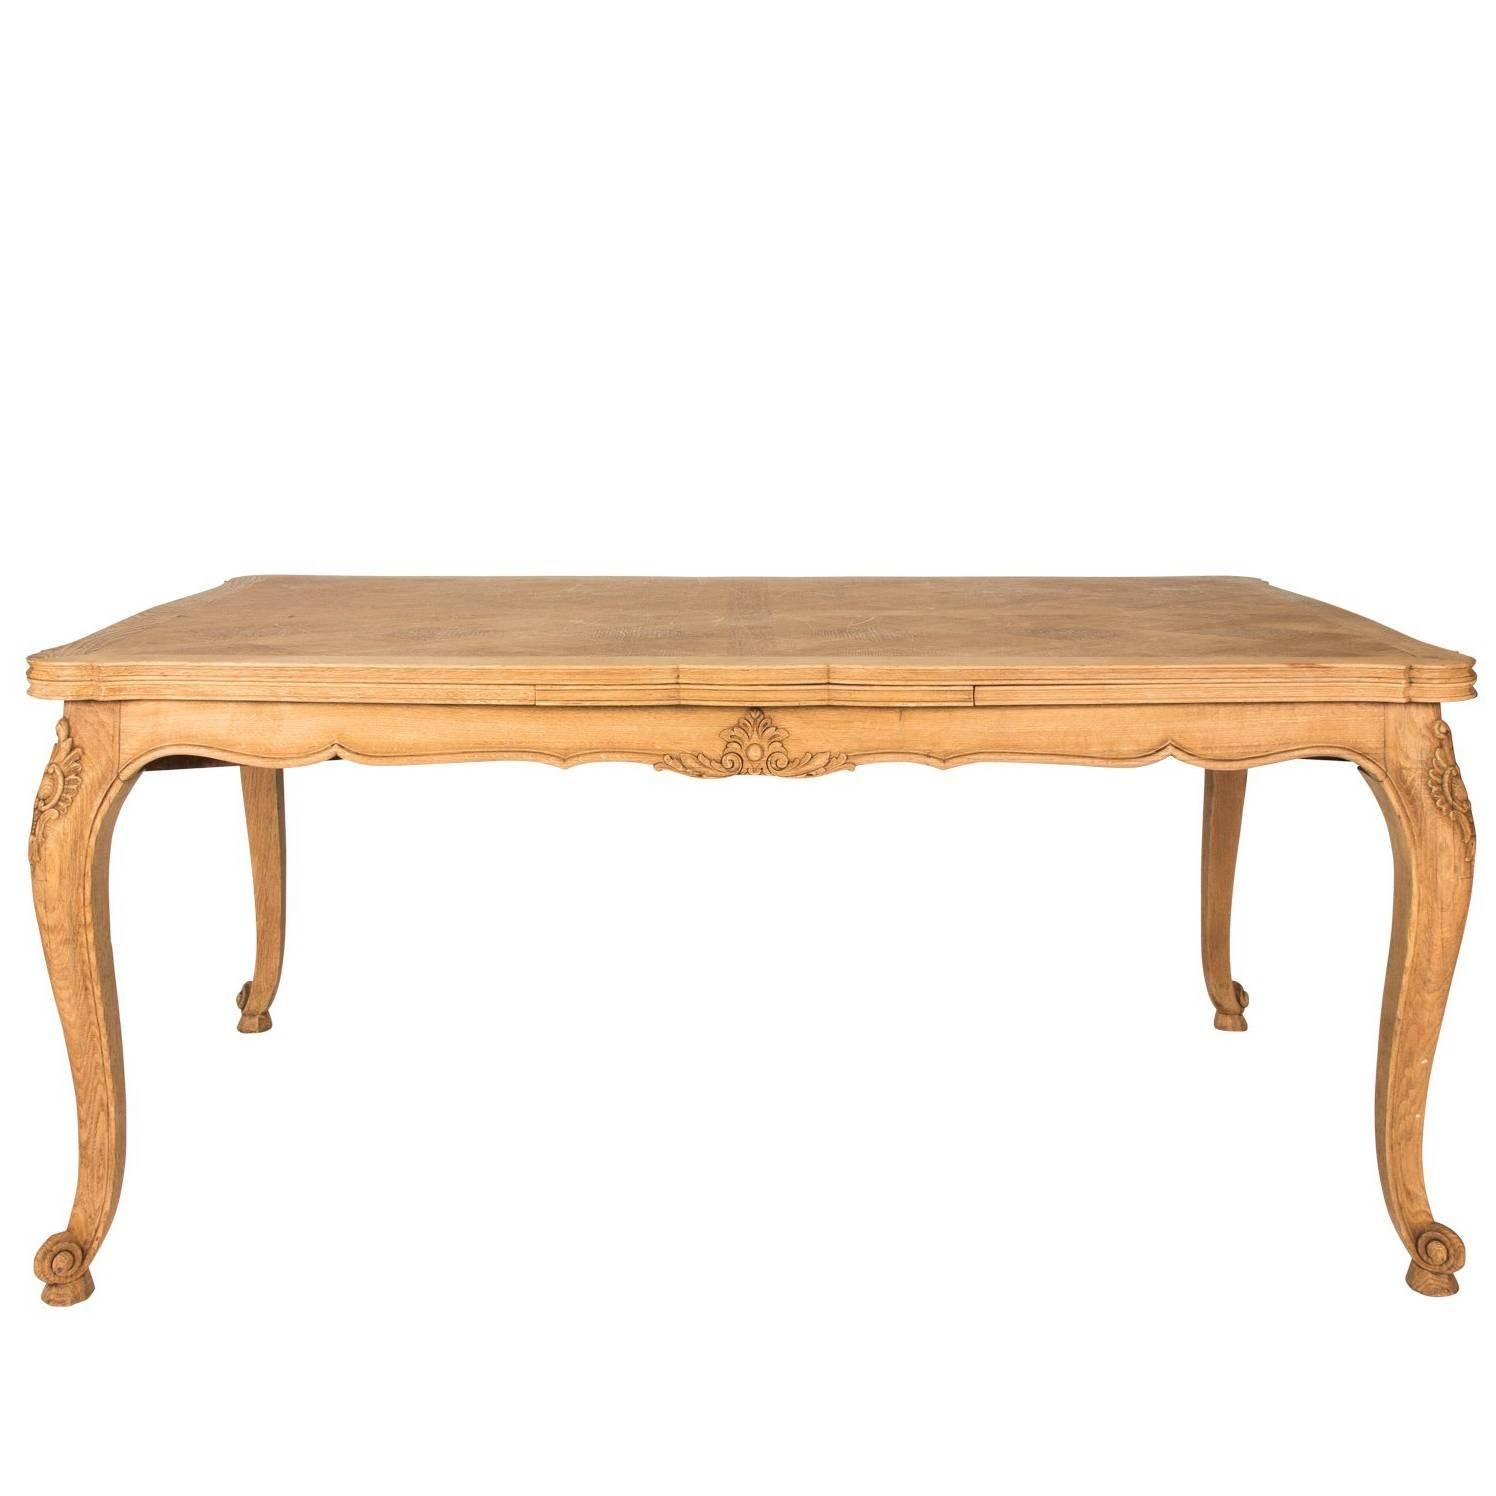 Bleached Oak Dining Table For Sale